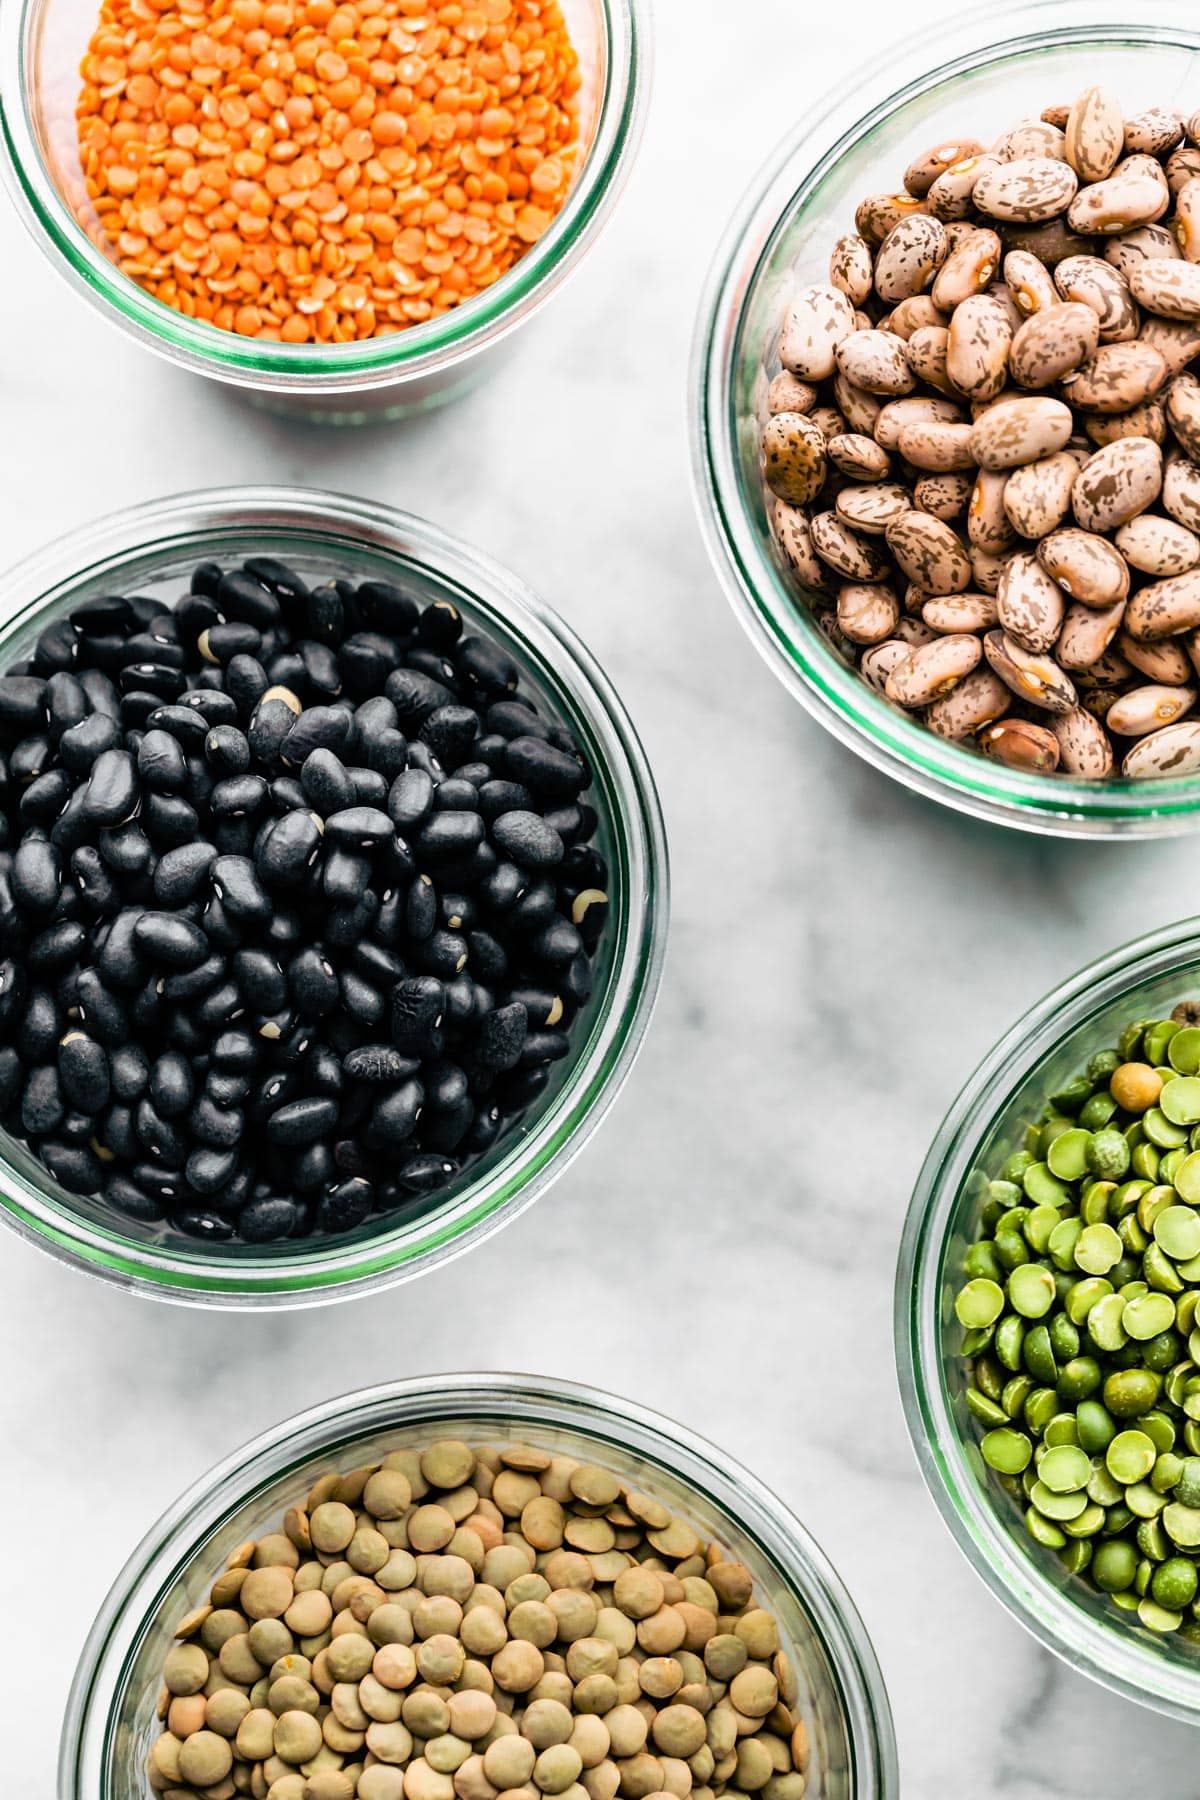 Overhead shot of lentils, kidney beans, black beans and split peas all in their own glass jars.